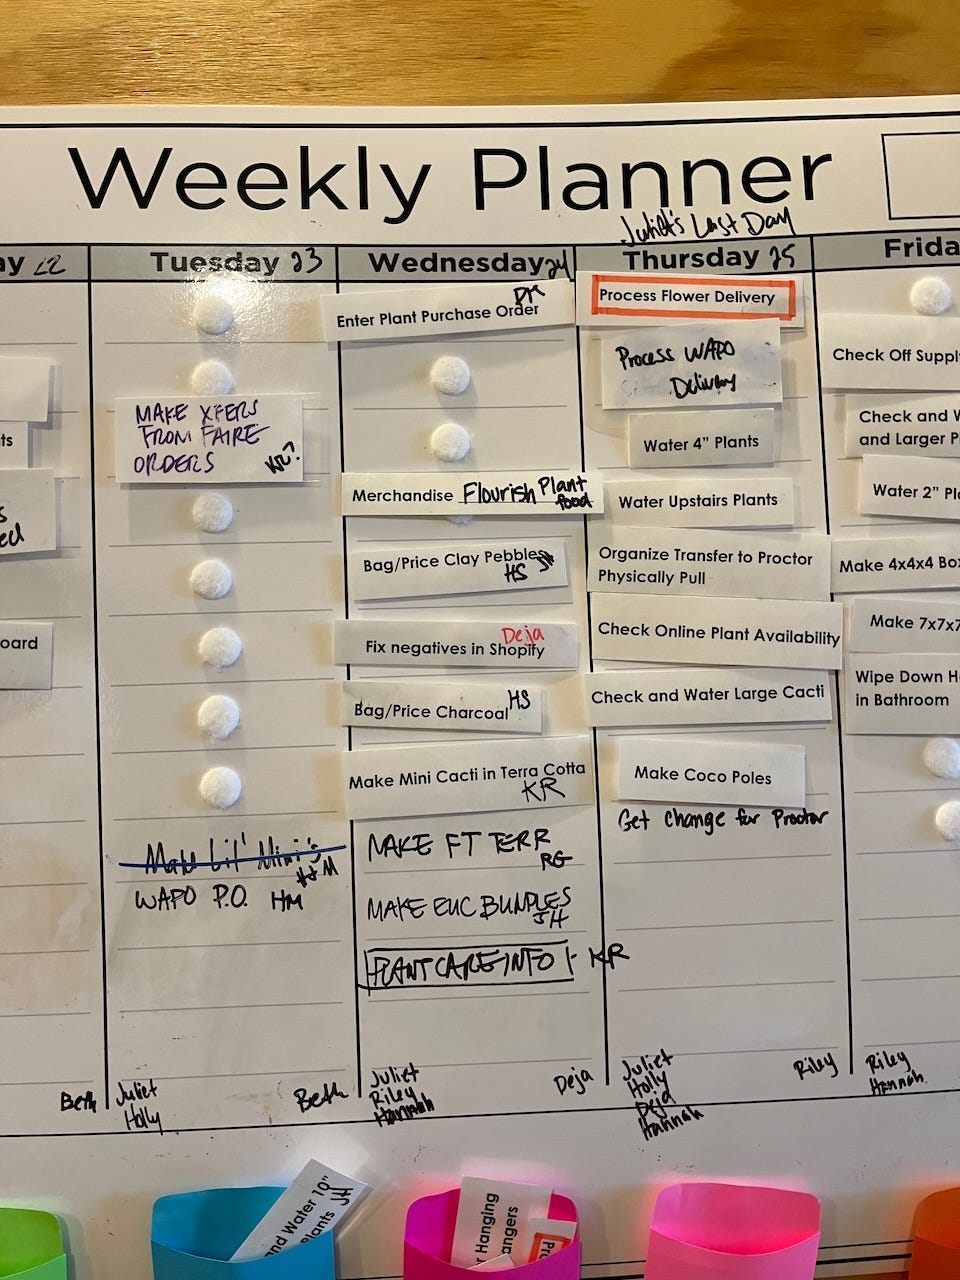 weekly planner whiteboard with tasks assigned on each day